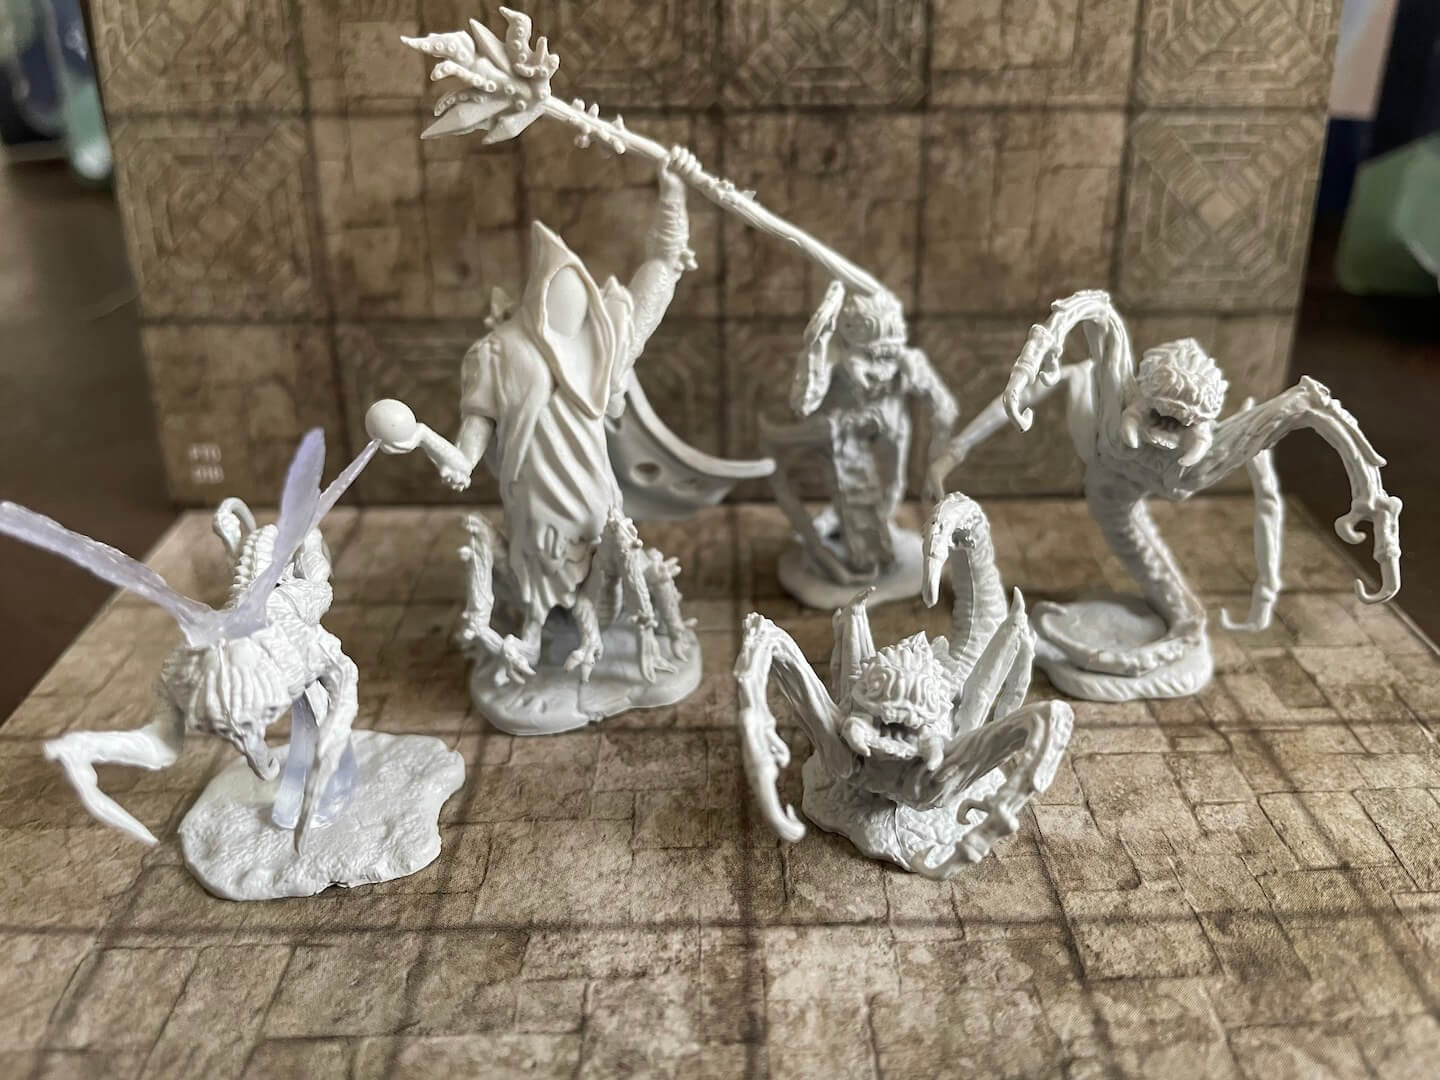 Wizkids Critical Role Miniatures: Core Spawn Emissary, Seer, and Crawlers